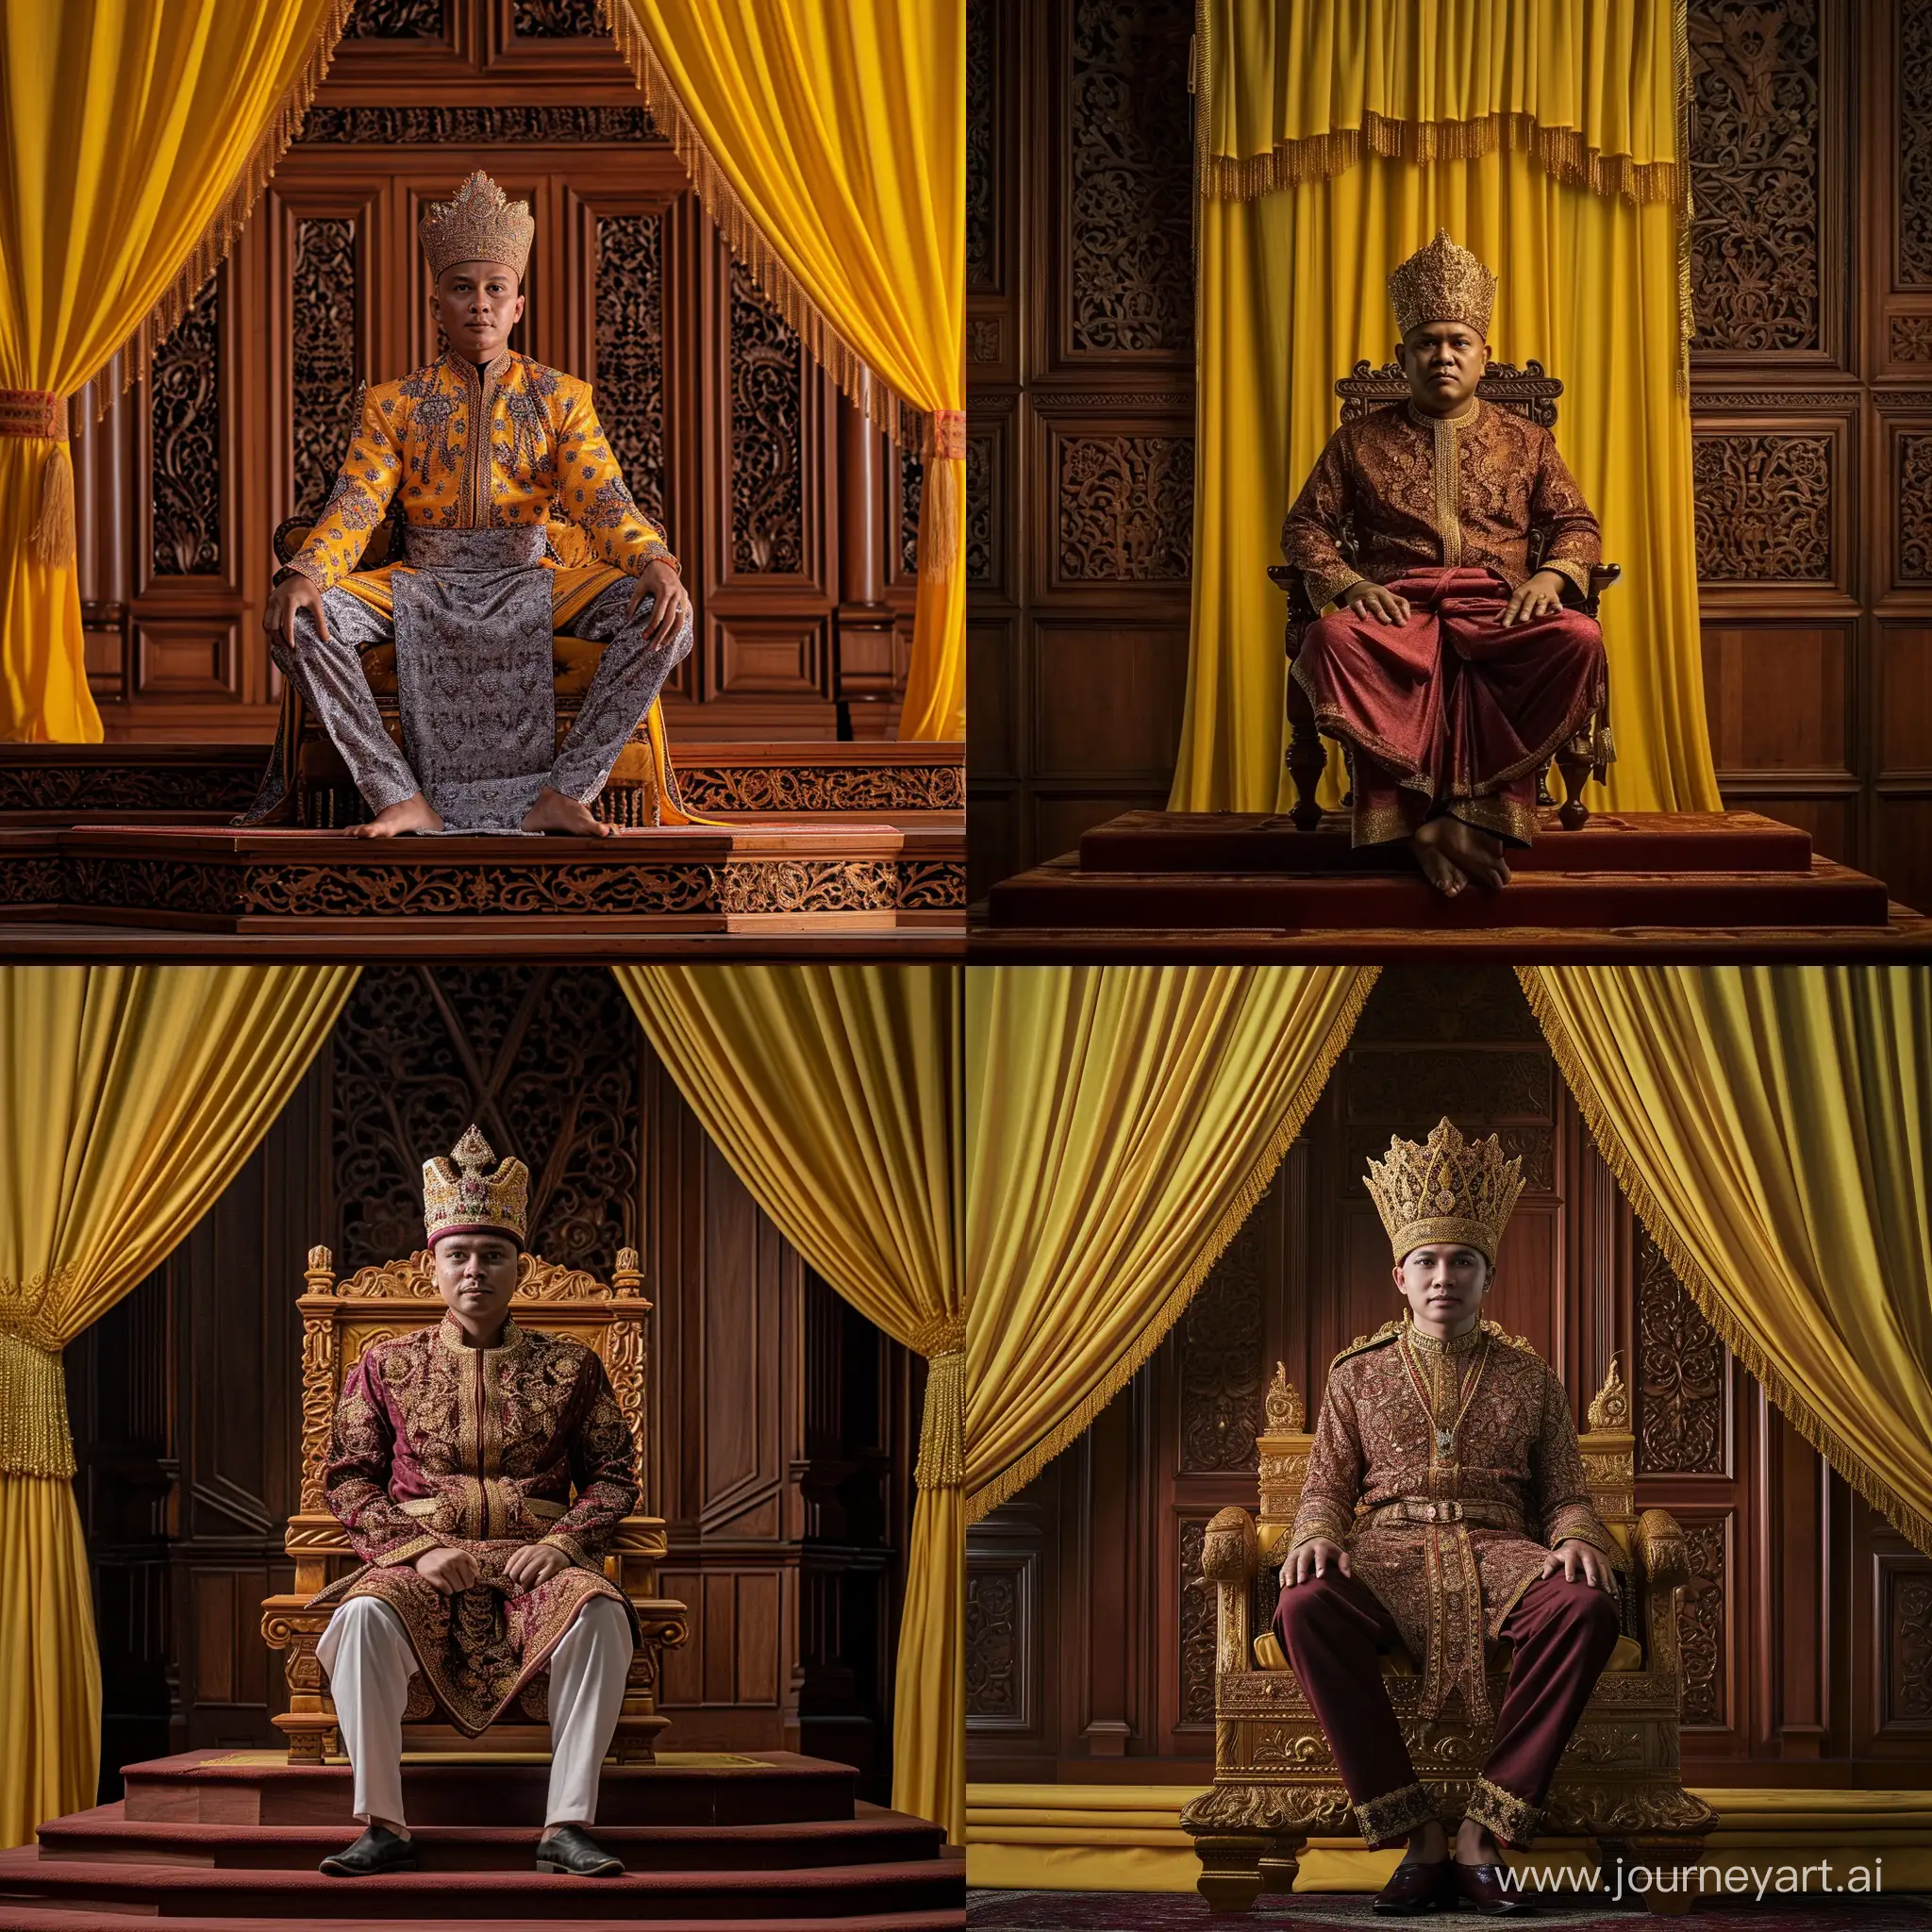 A full body shot, a malay man in his 30s, in malay classic royal attire, traditional headdress (tanjak). Sitting cross-legged on a throne on three-layer stage. Background a intricate carved timber wall panelling, yellow curtain with tassel hangs. Dim, dramatic lighting. Image is majstic, epic, professional color grading.